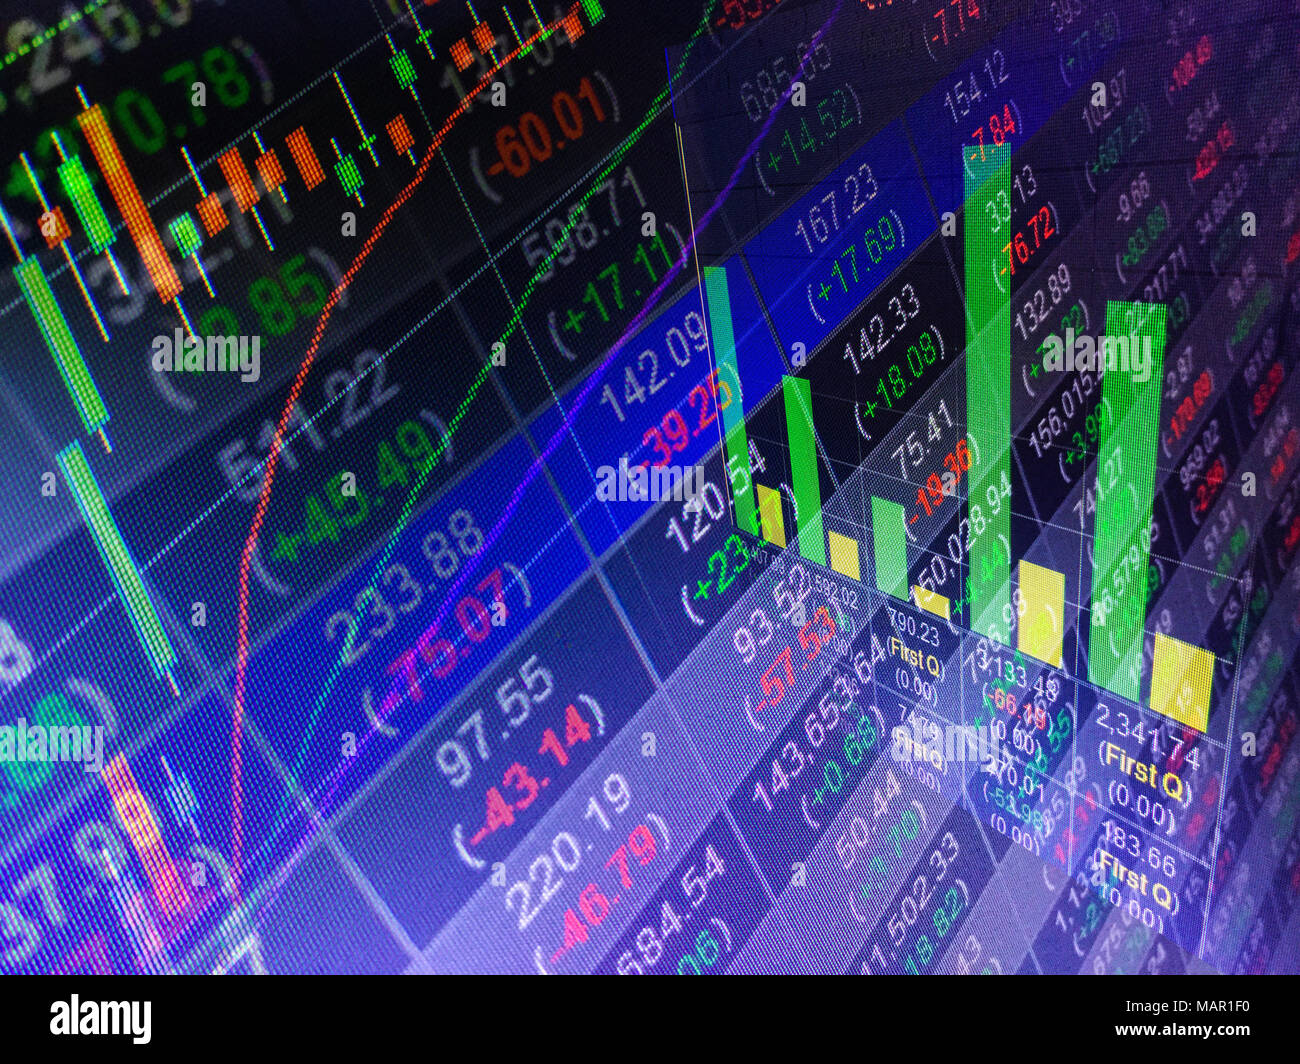 Financial stock market exchange, business report concept background Stock Photo